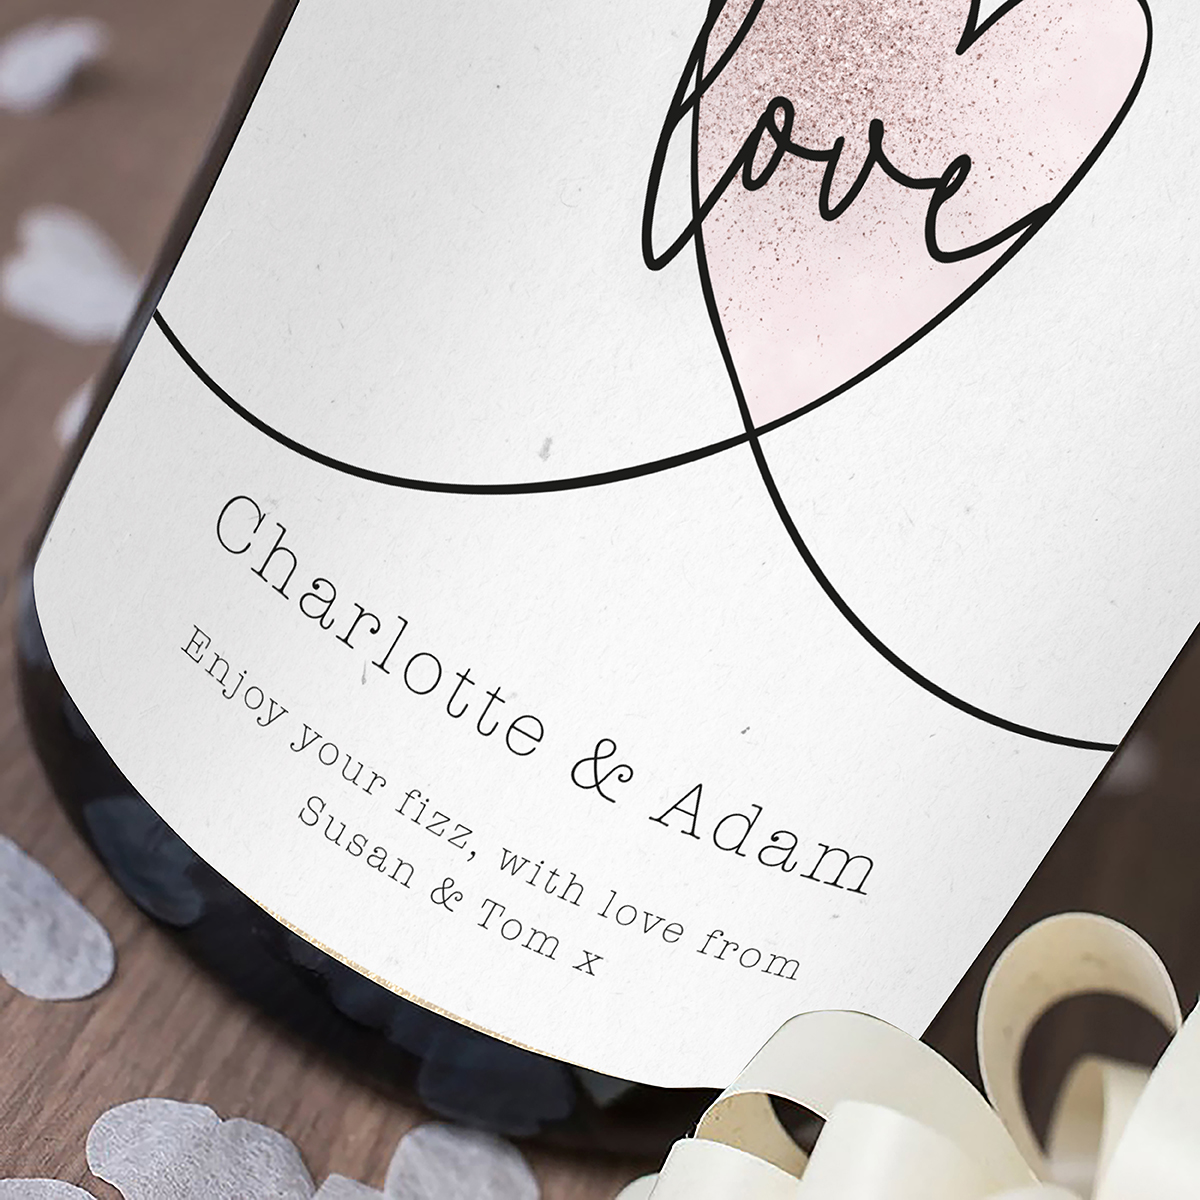 Luxury Personalised Champagne - Couple's Anniversary